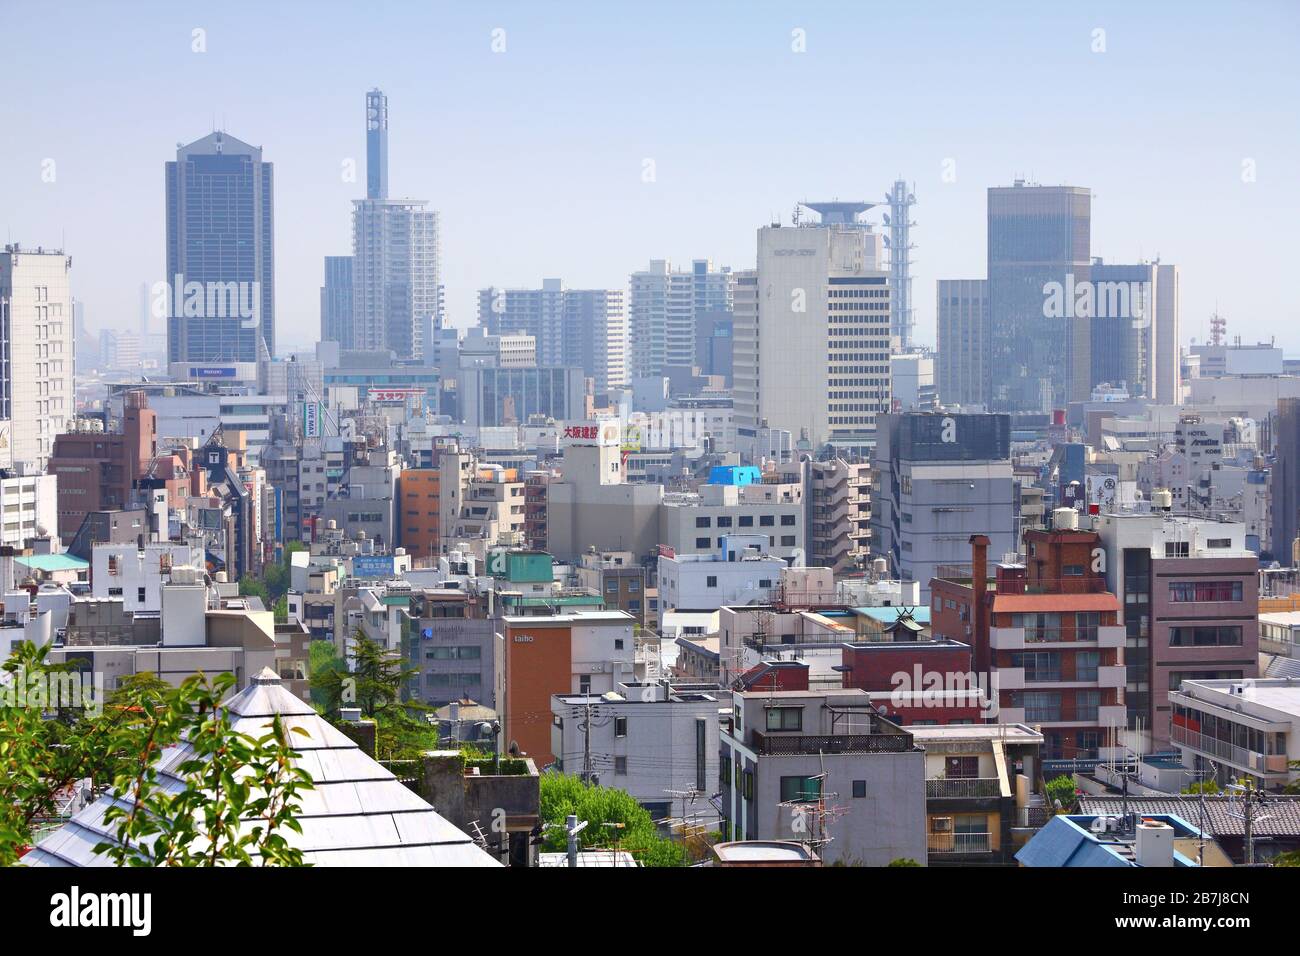 KOBE, JAPAN - APRIL 24, 2012: Skyline view of Kobe, Japan. Kobe is the 6th largest city of Japan, with population of 1.5m. Stock Photo